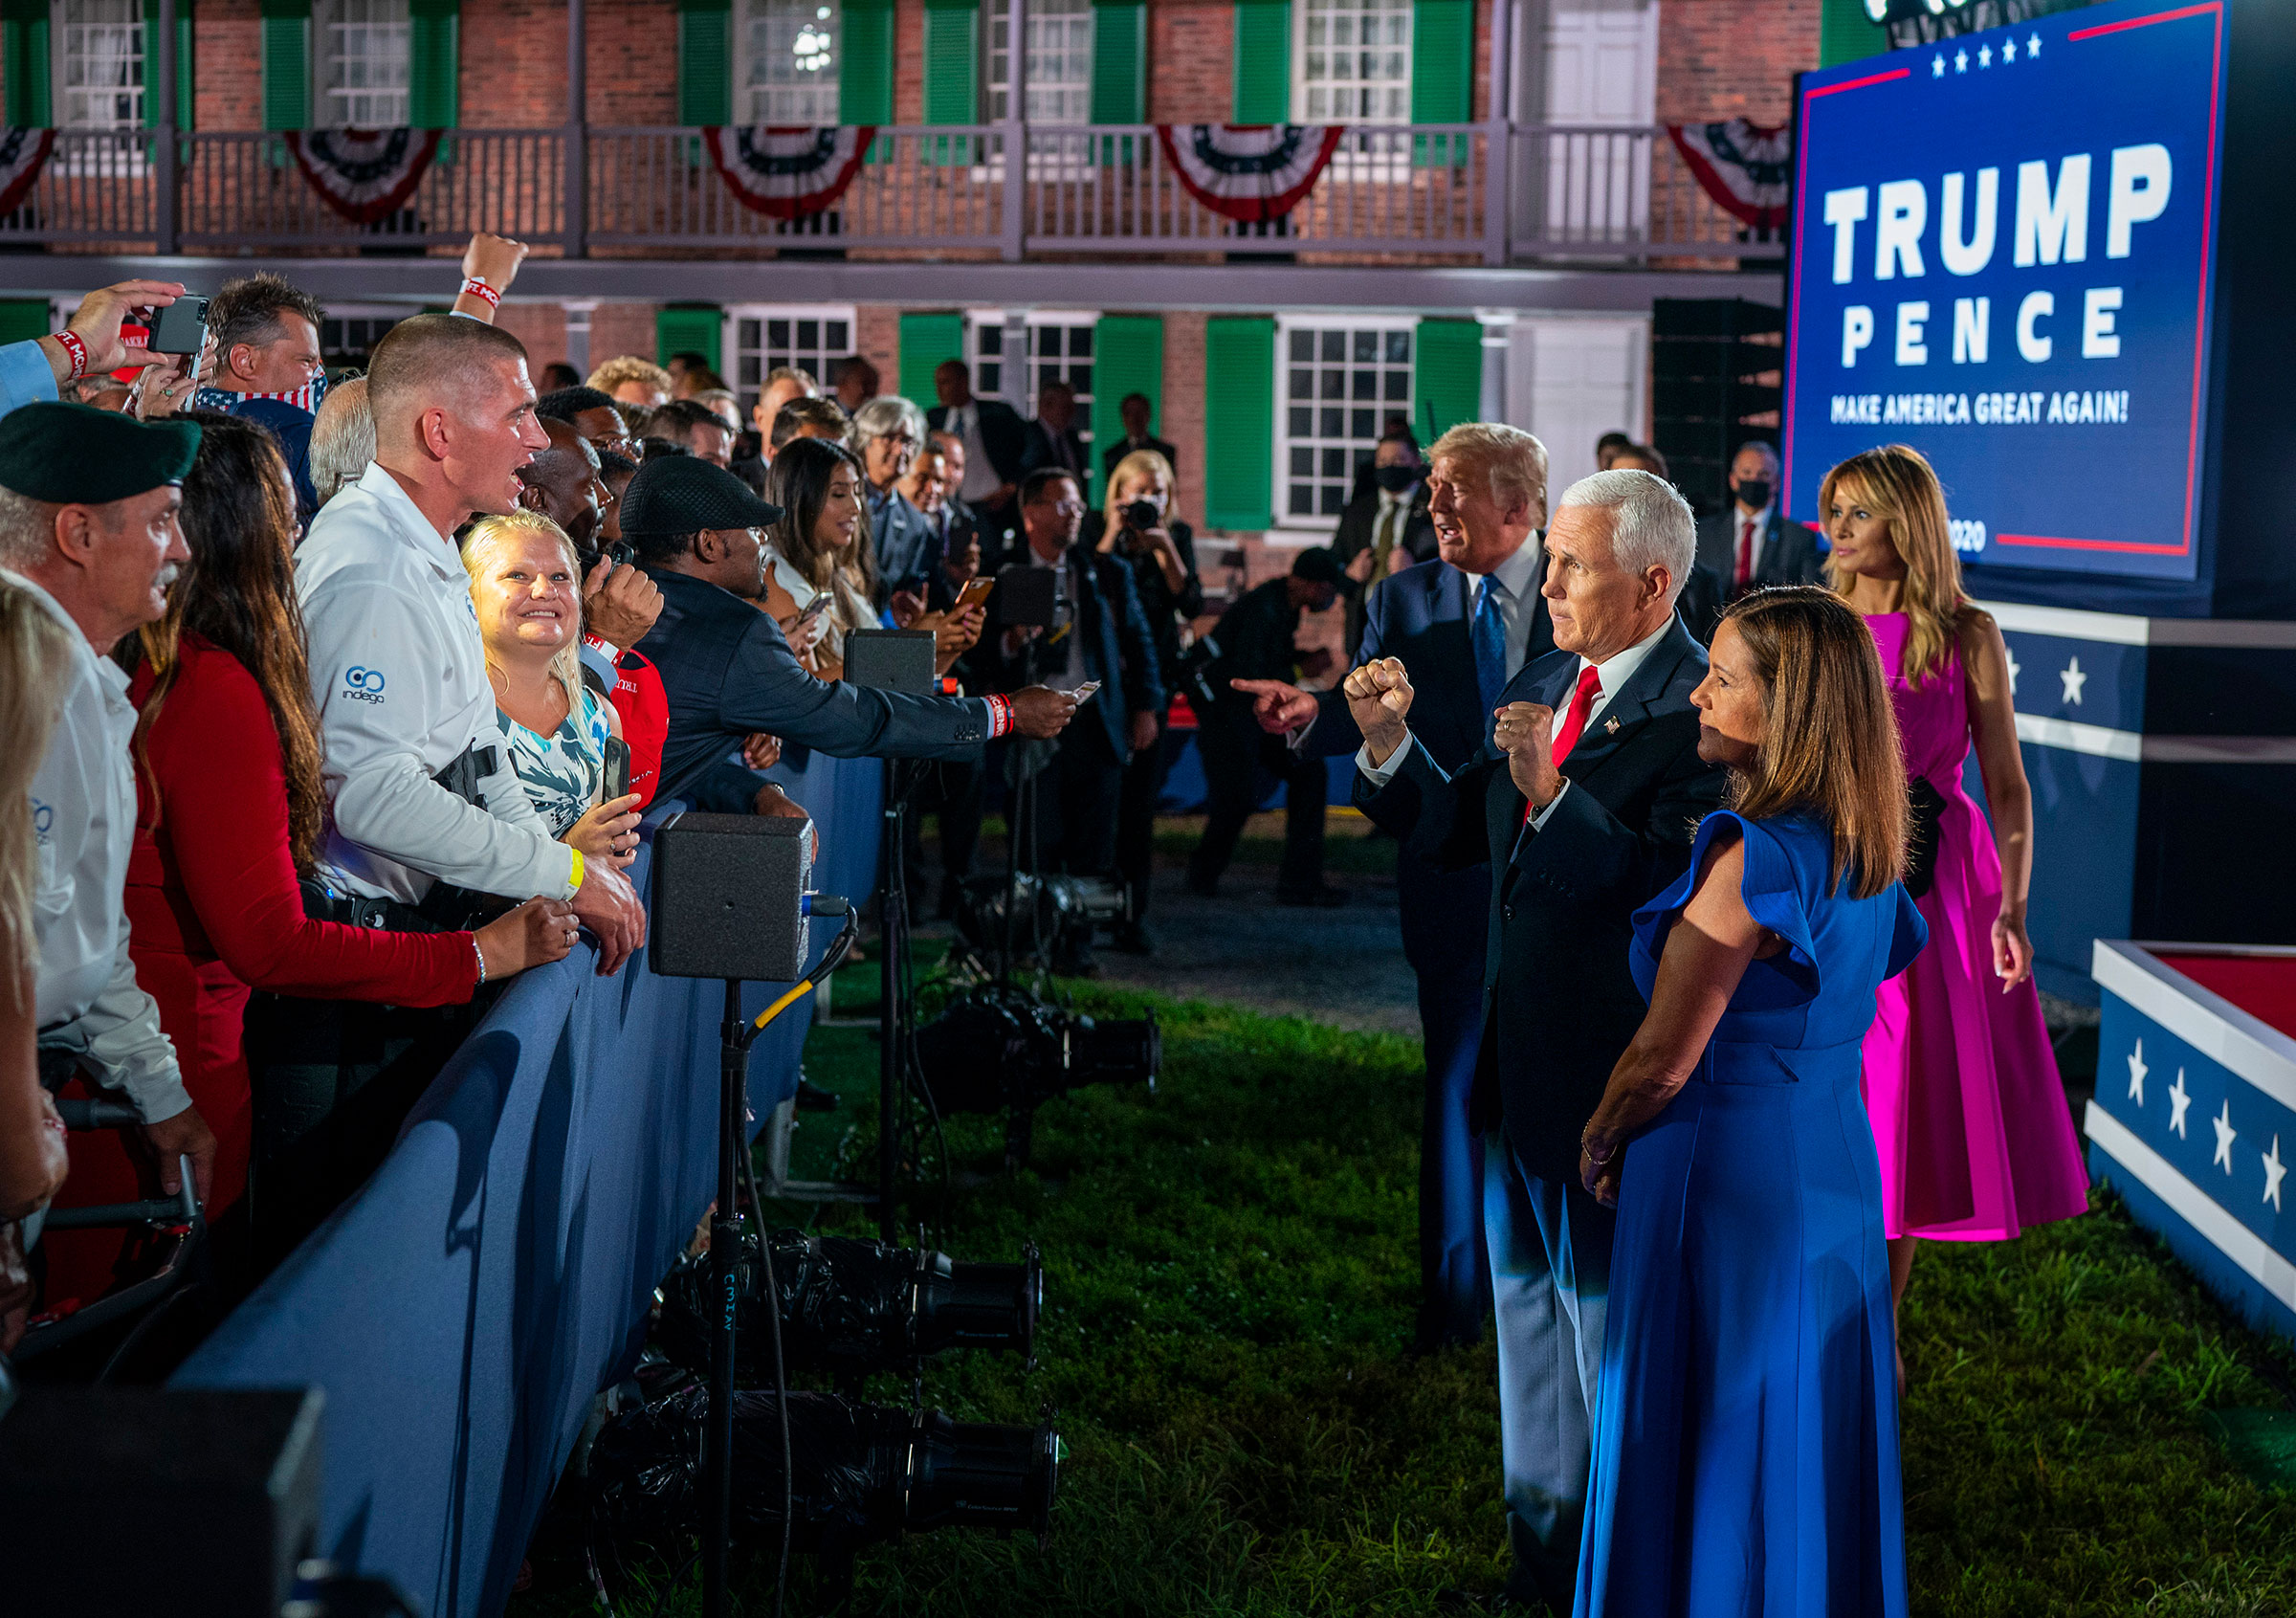 President Donald Trump and first lady Melania Trump, right behind, join Vice President Mike Pence and is wife, Karen Pence, while greeting attendees at Fort McHenry in Baltimore, during the Republican National Convention, on Wednesday, Aug. 26, 2020. (Dou